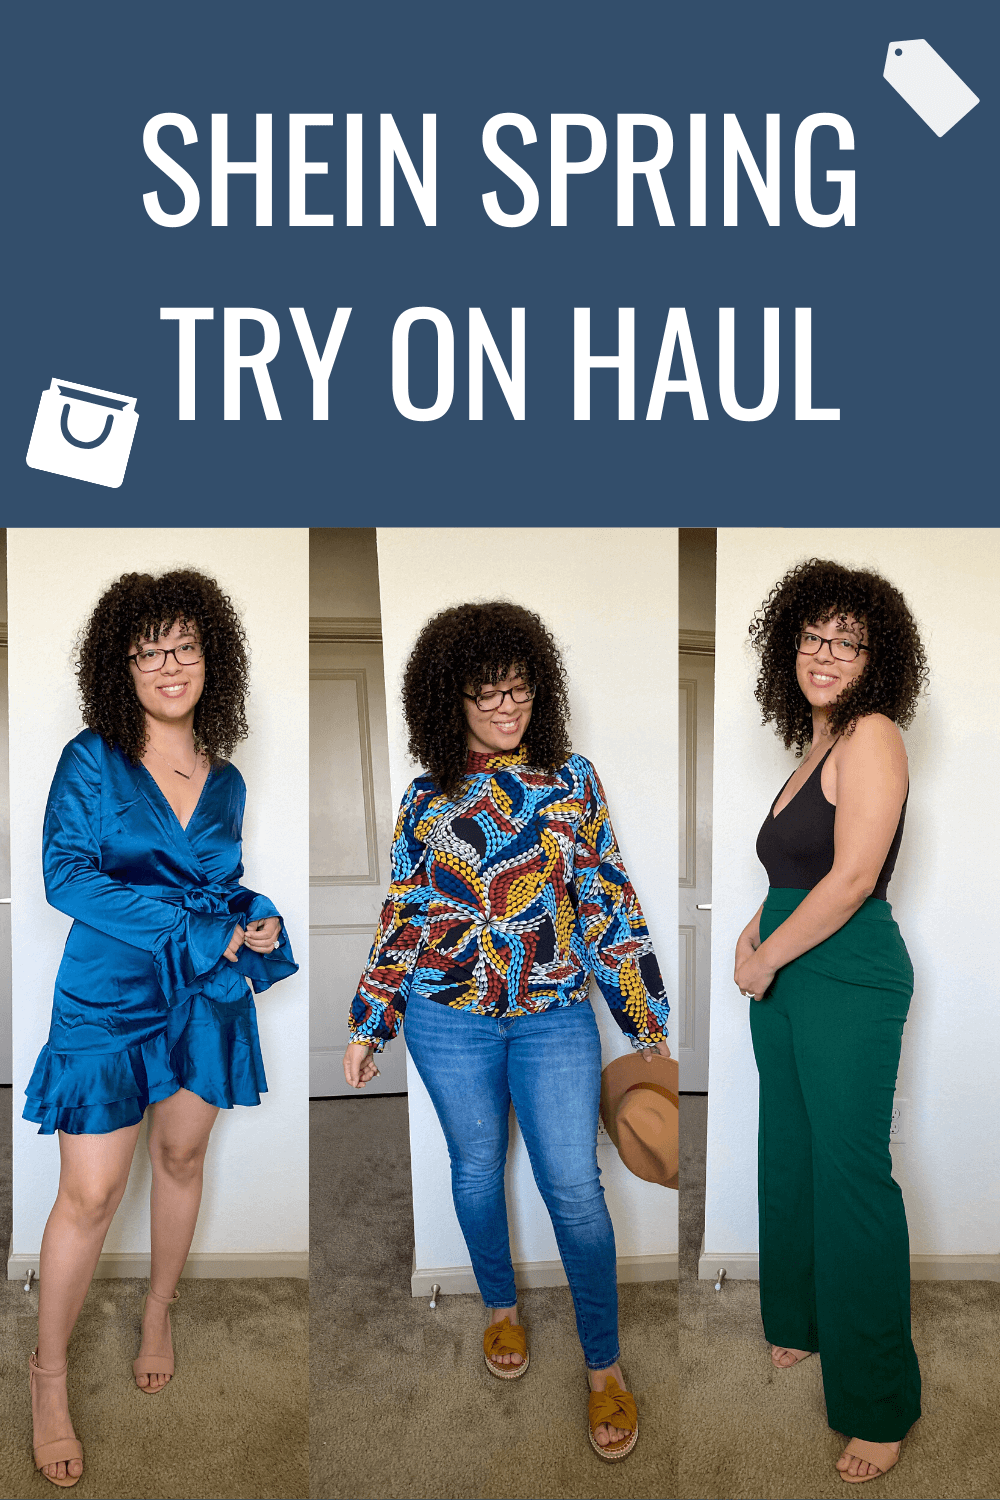 SHEIN SPRING TRY ON HAUL